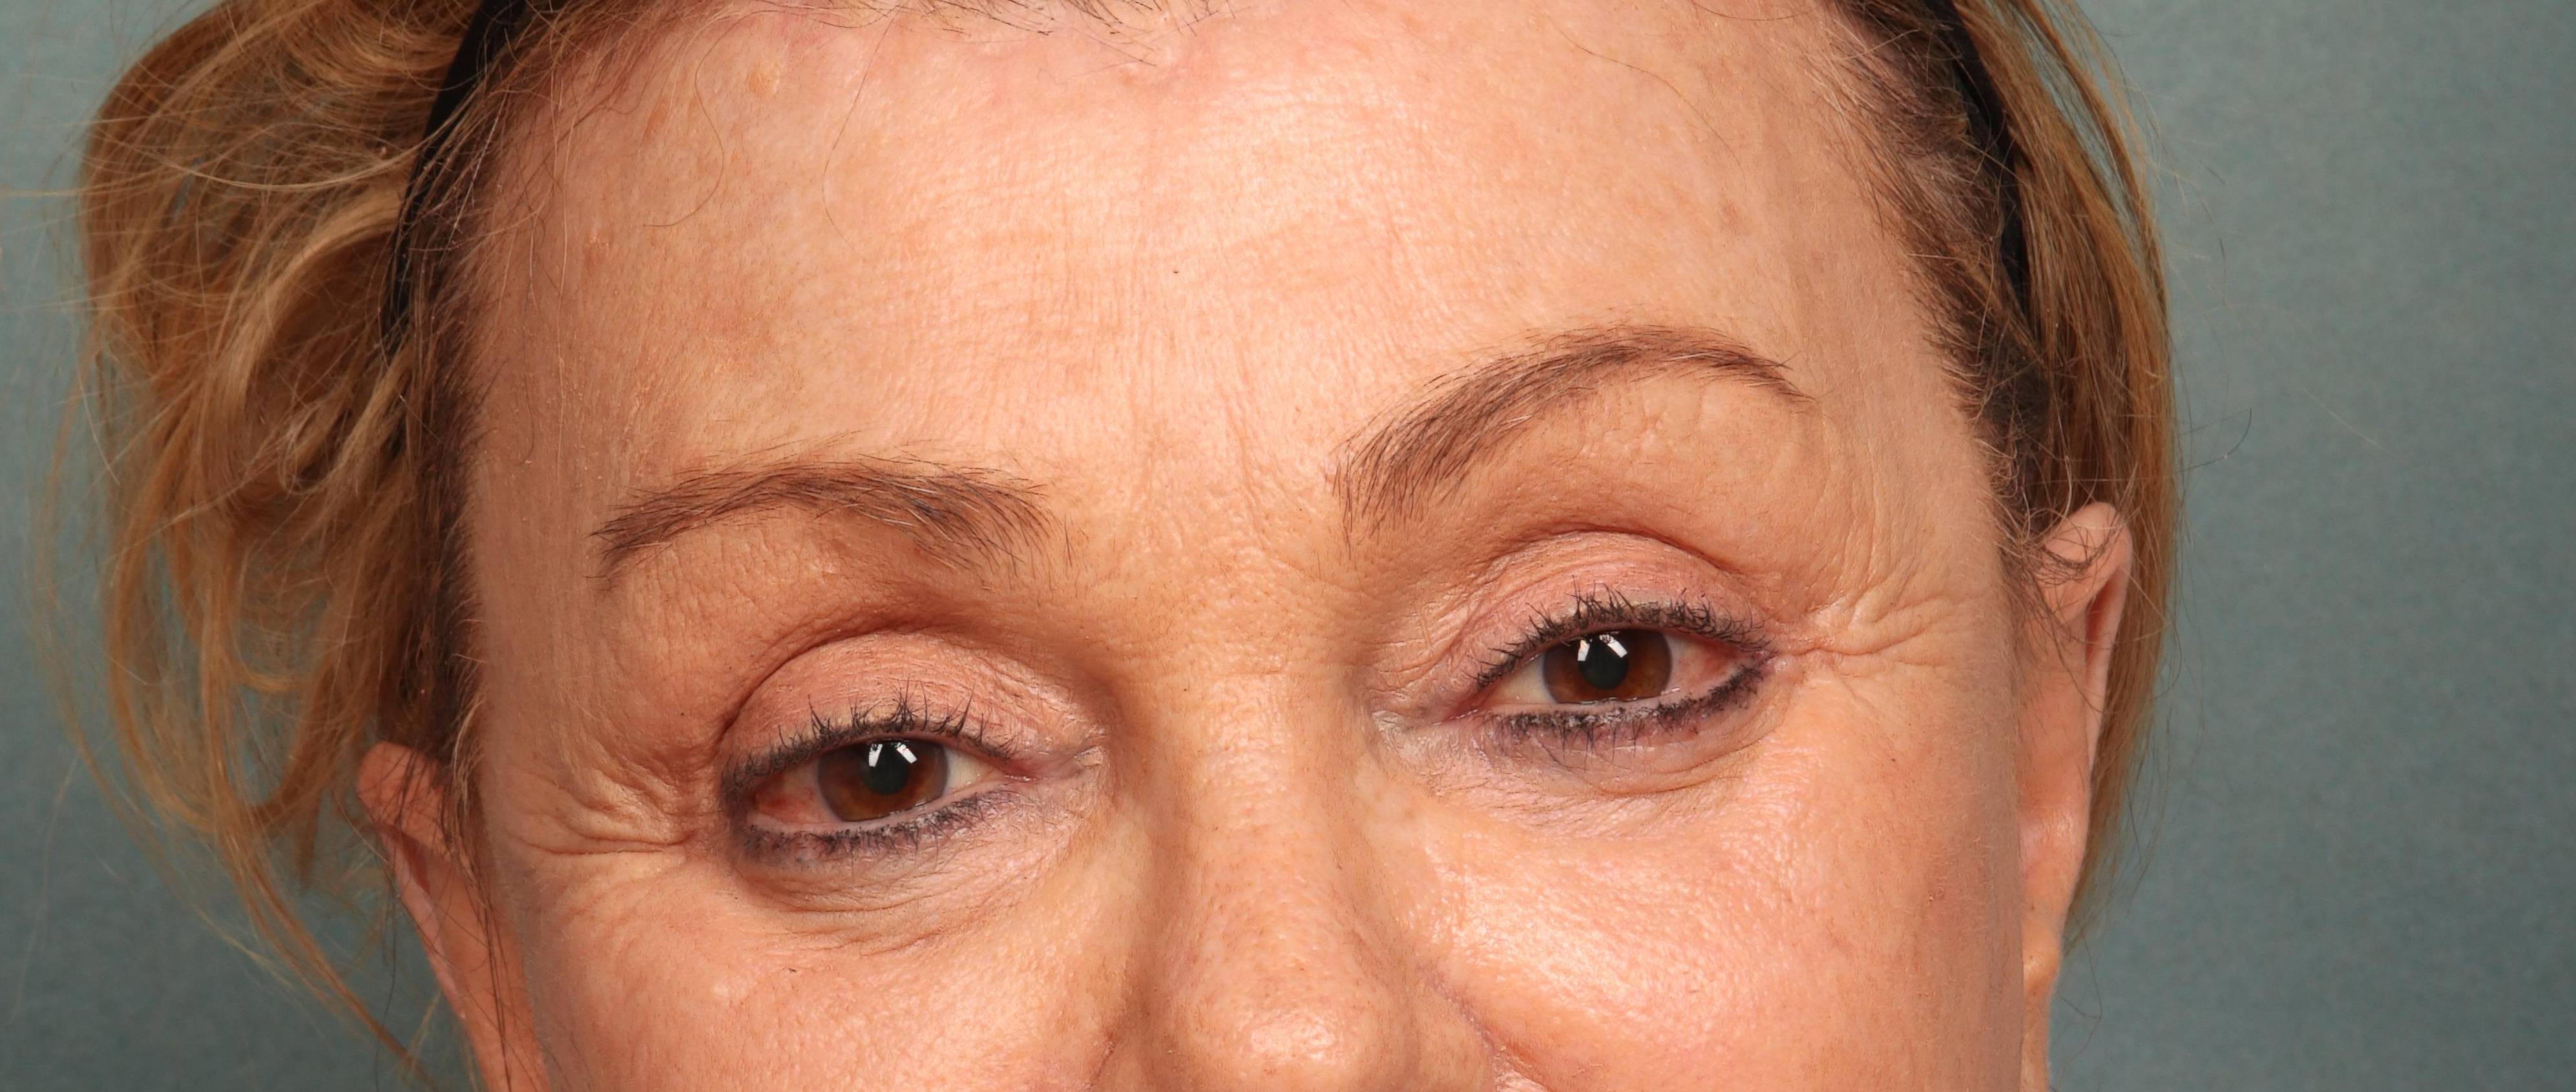 Brow Lift Case 7 After